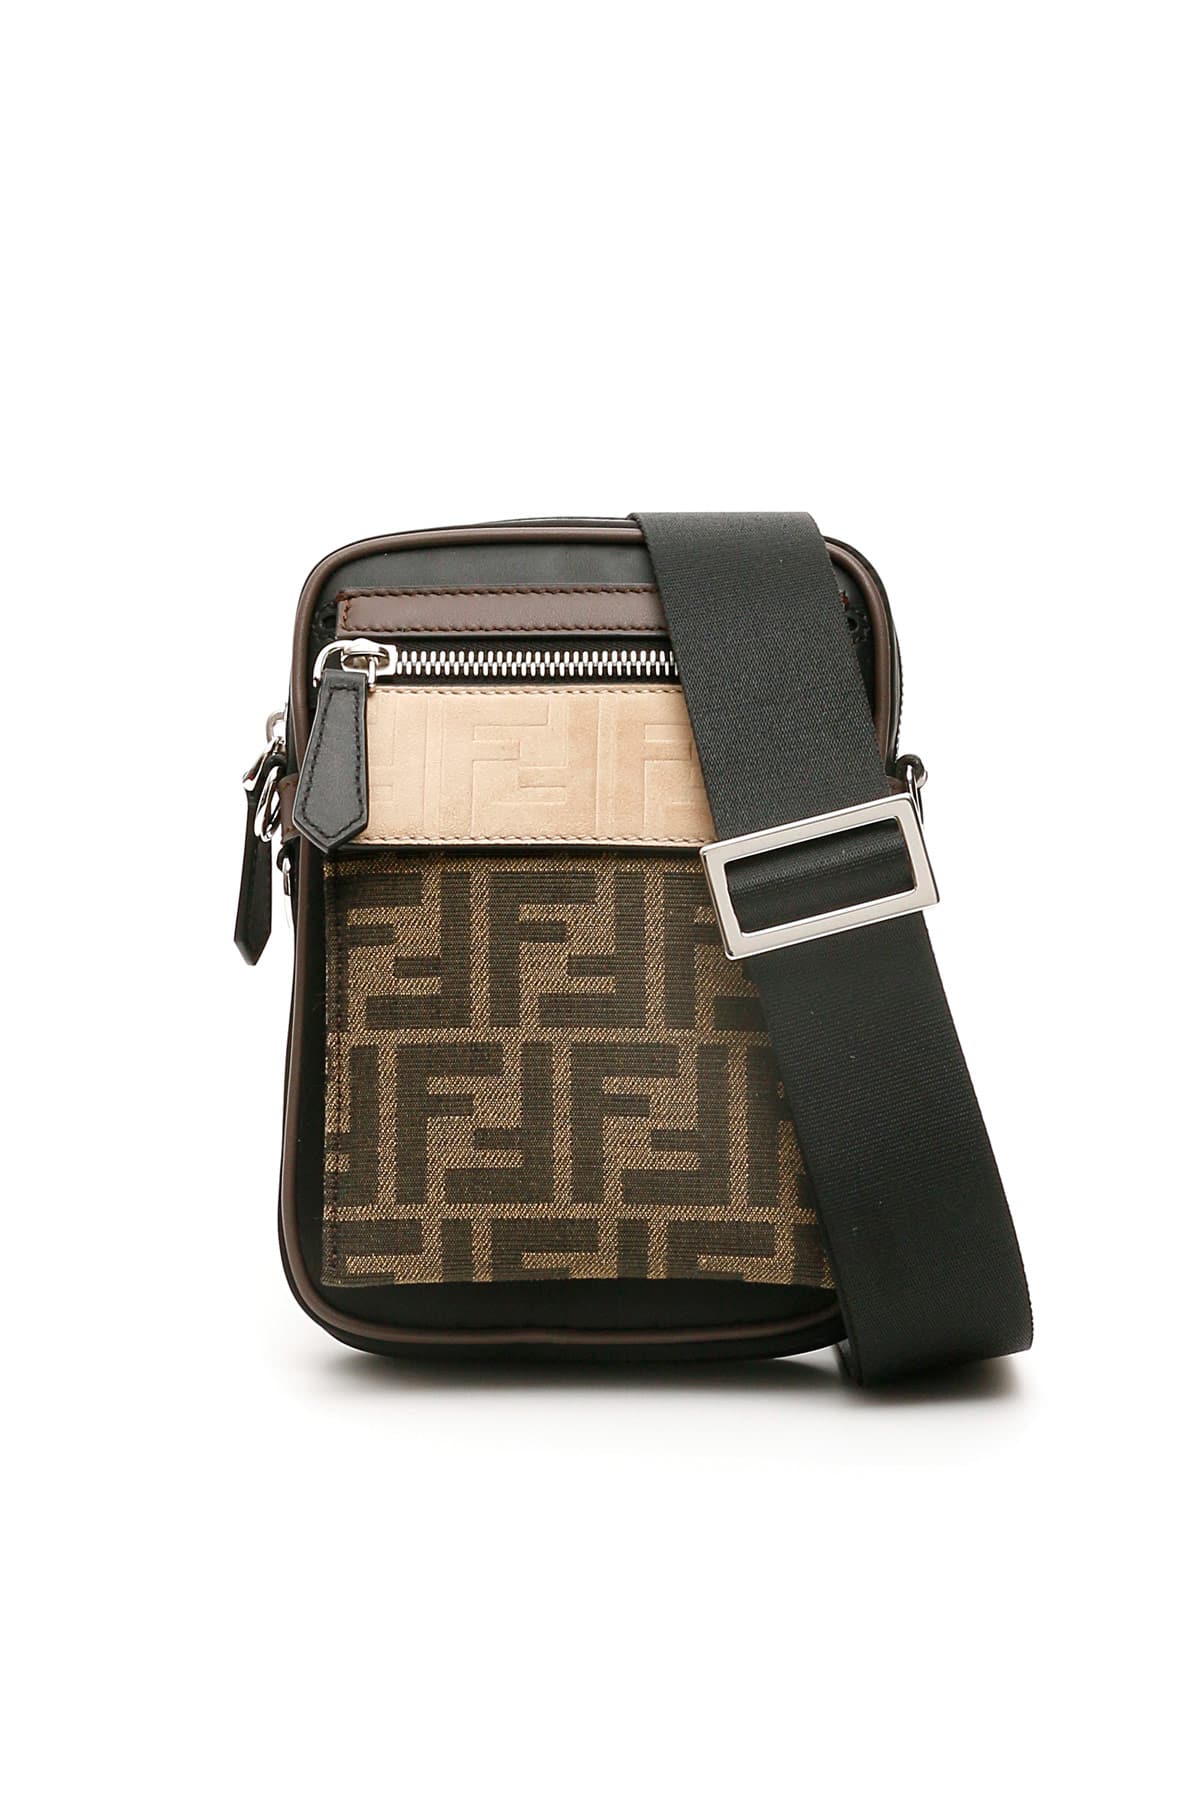 Fendi nylon mini bag with contrasting leather piping, equipped with a detachable front pouch in FF j